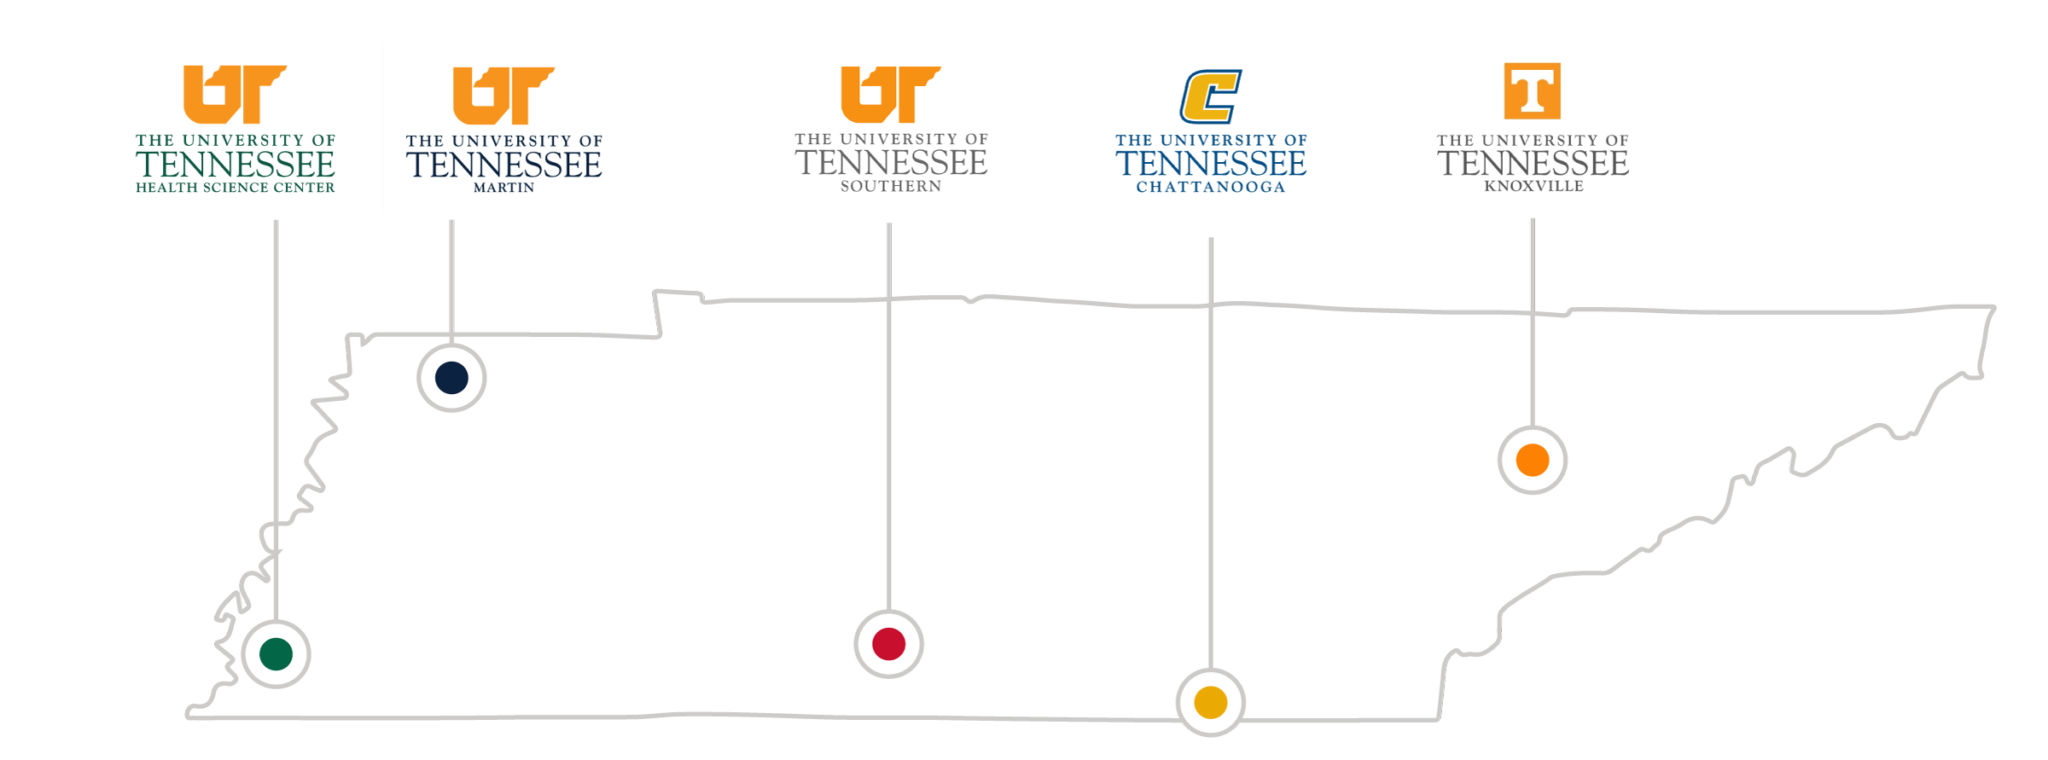 Campus Guide The University of Tennessee System